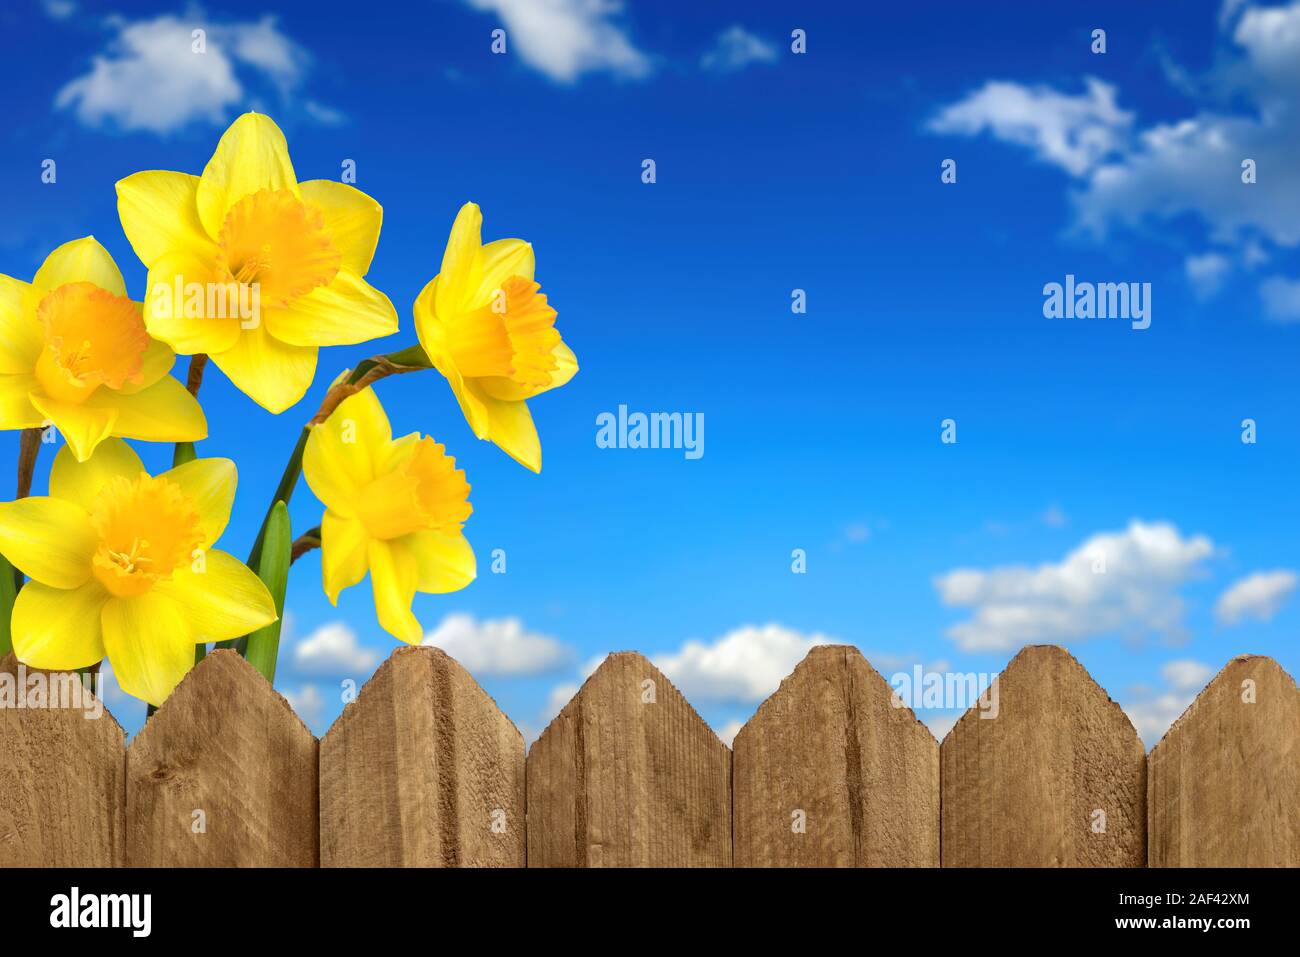 Daffodils - Blossoming bright yellow spring flowers behind a wooden fence in front of the deep blue sky with a few fluffy white clouds Stock Photo